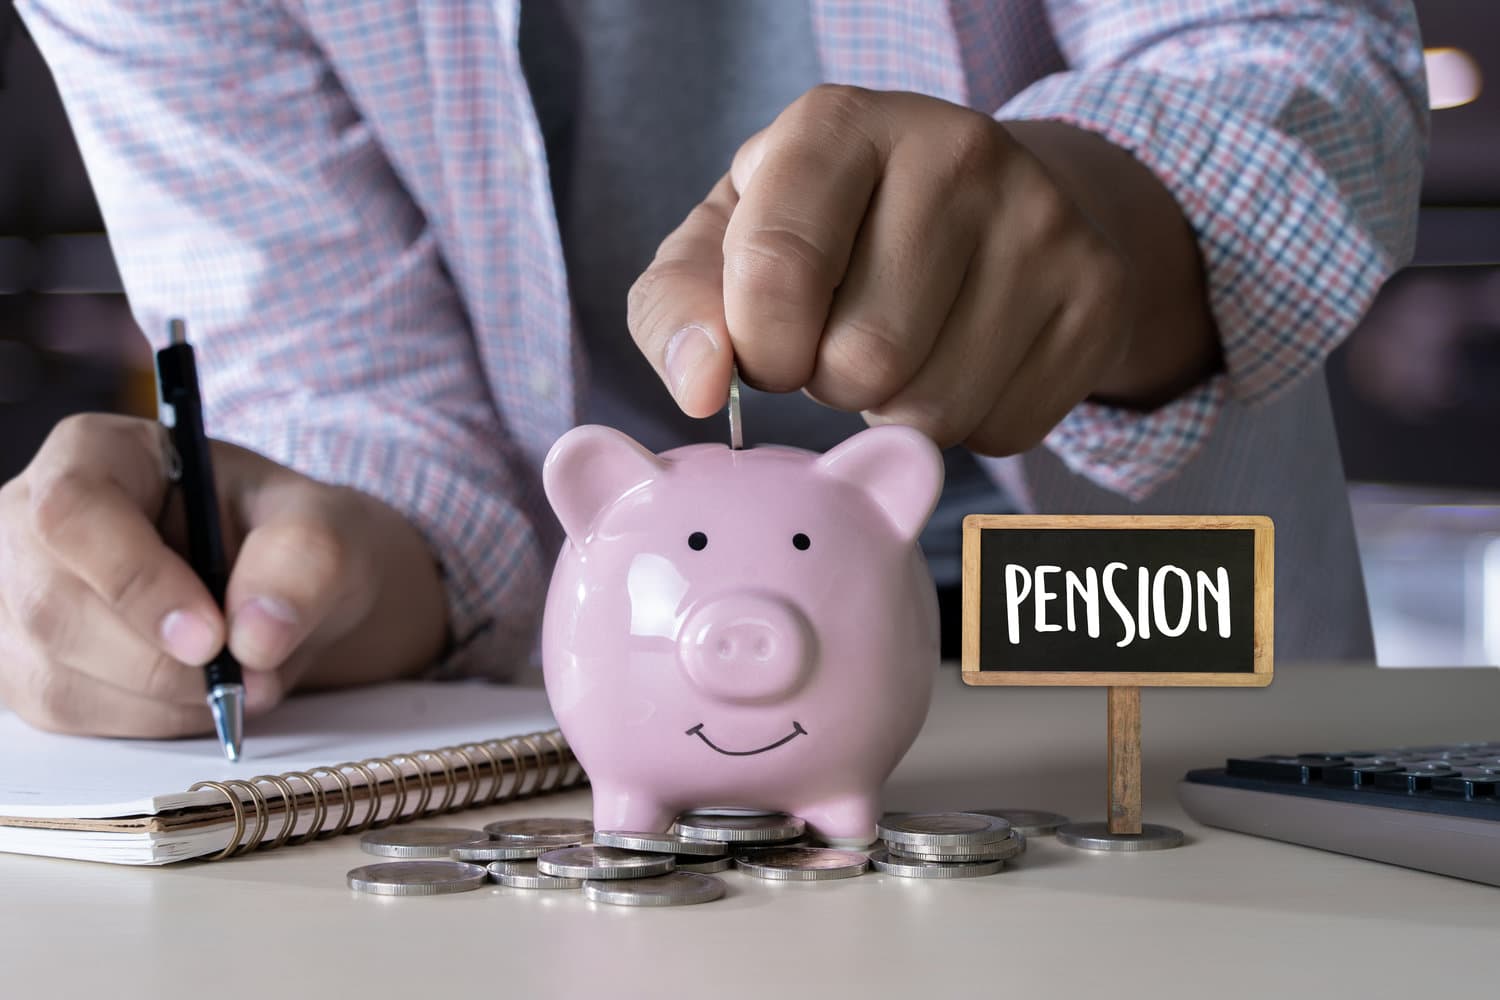 A pension is a type of tax wrapper